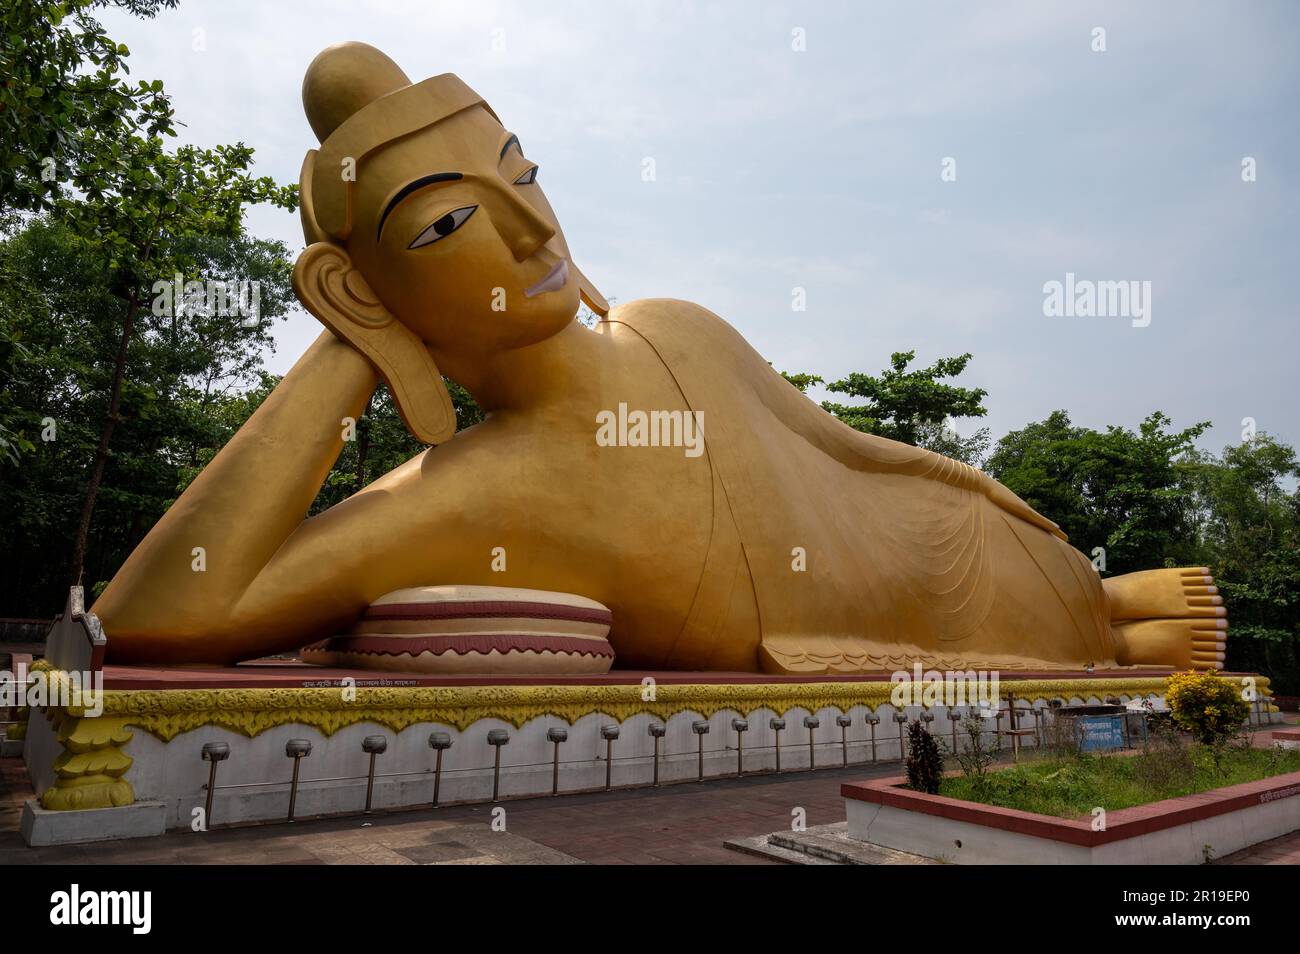 100 foot golden-coloured reclining statue of Lord Buddha, located at the Vimukti Bibeshan Bhabna Kendra Temple, Cox's Bazar, Bangladesh Stock Photo